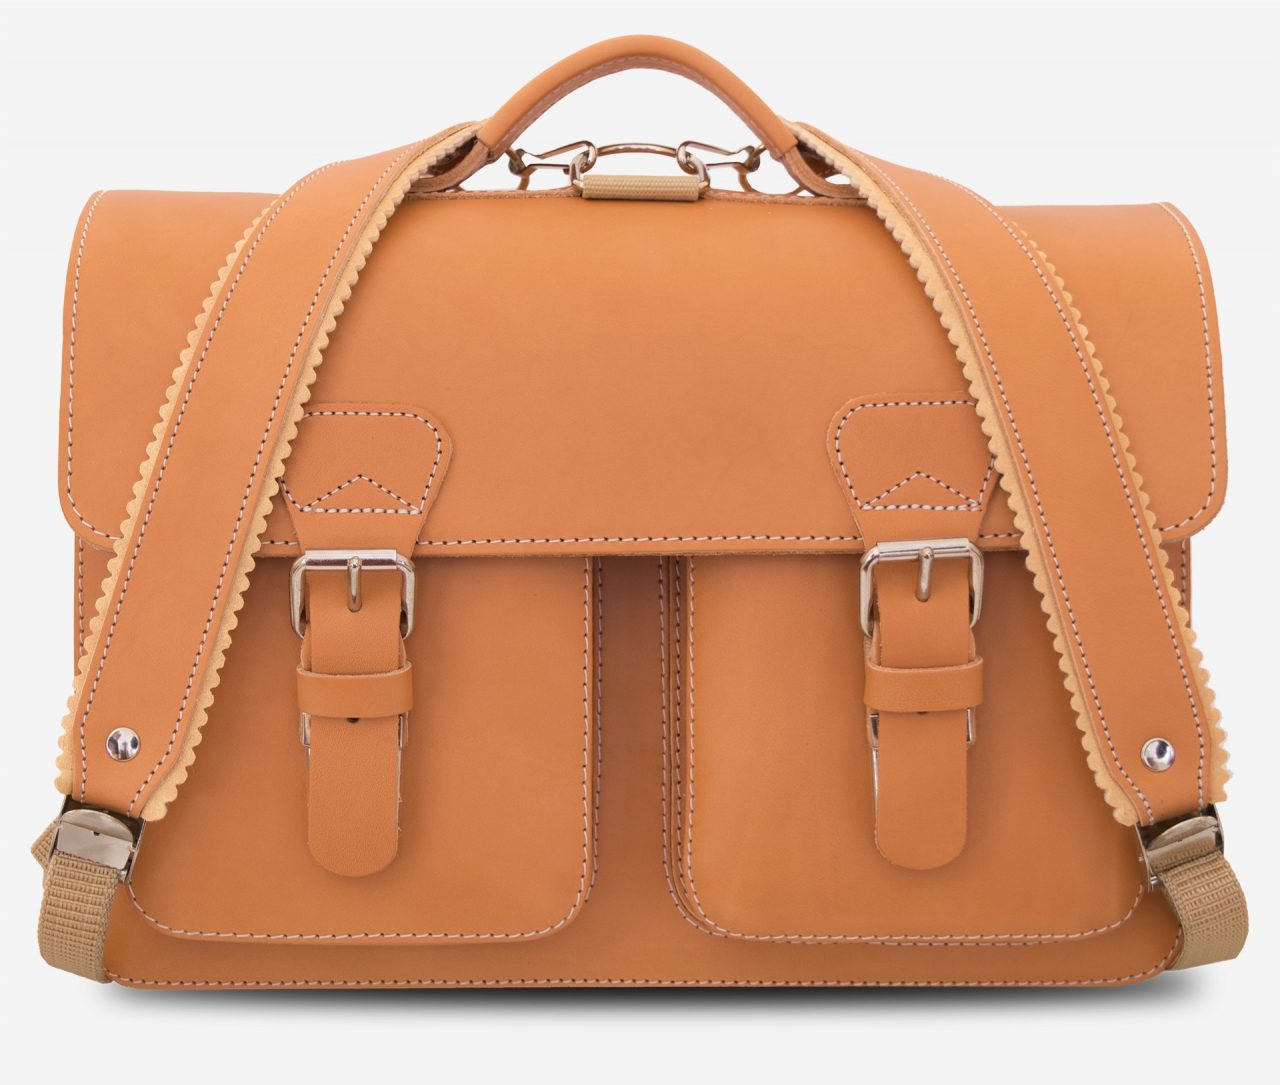 Front view of tan leather backpack satchel fitted with shoulder straps.